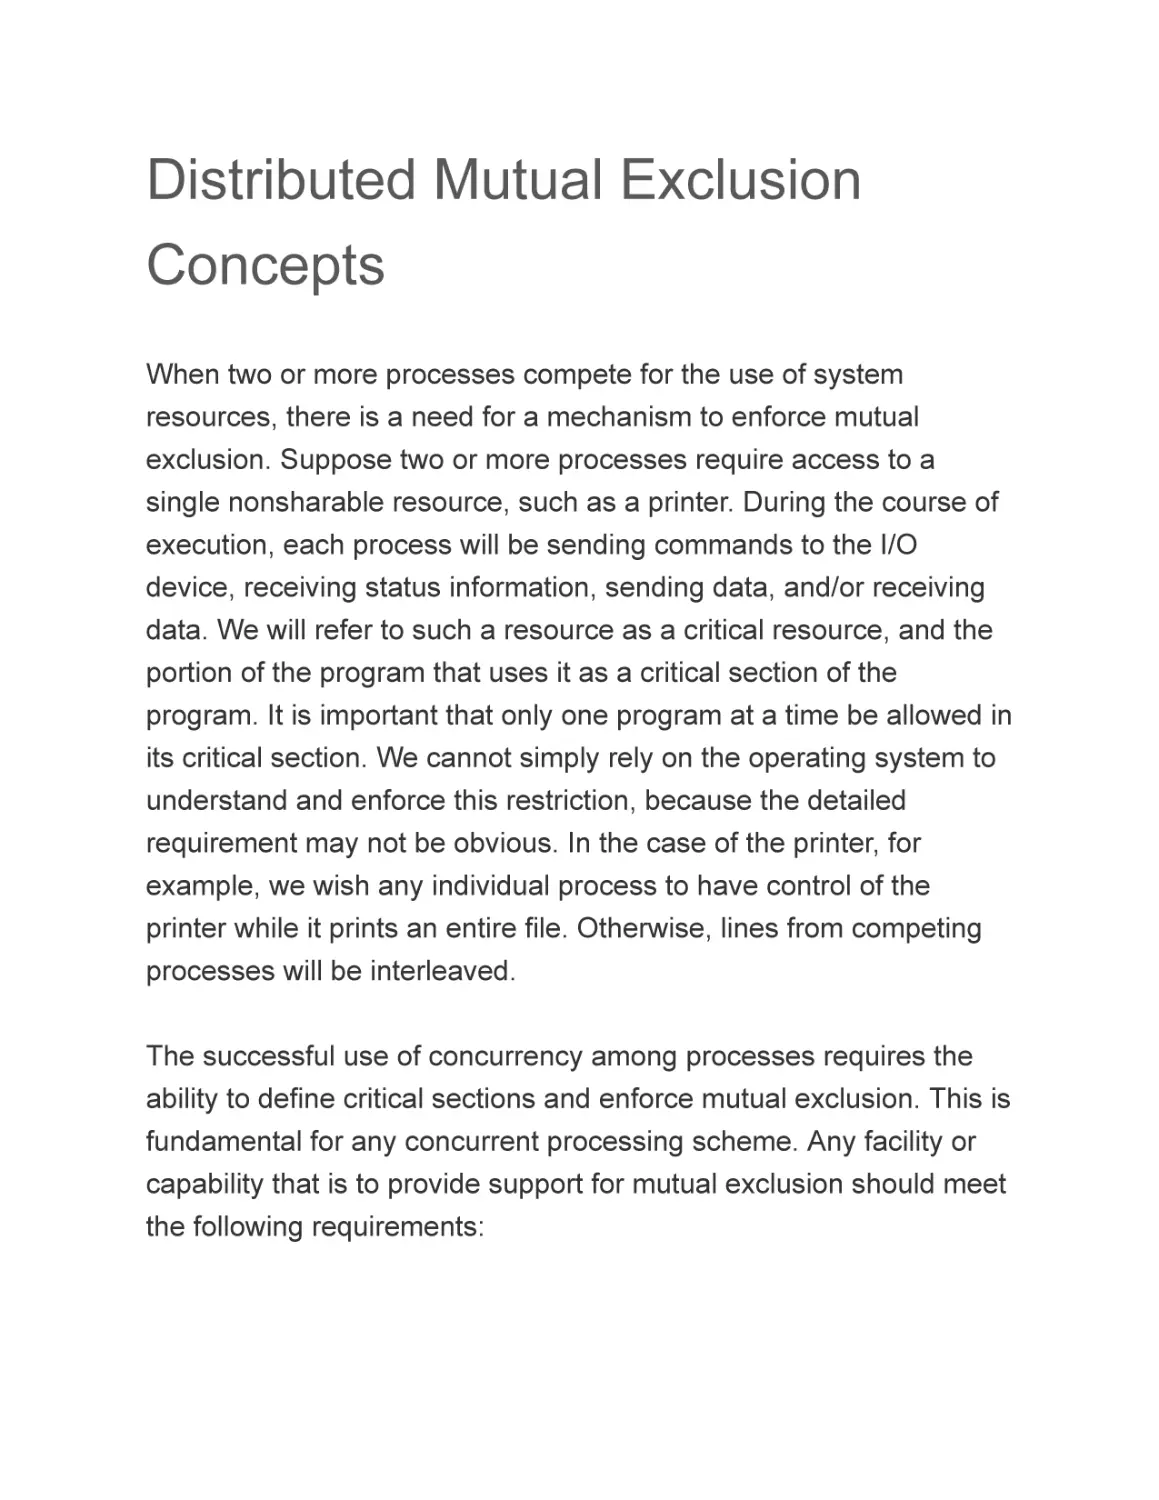 Distributed Mutual Exclusion Concepts